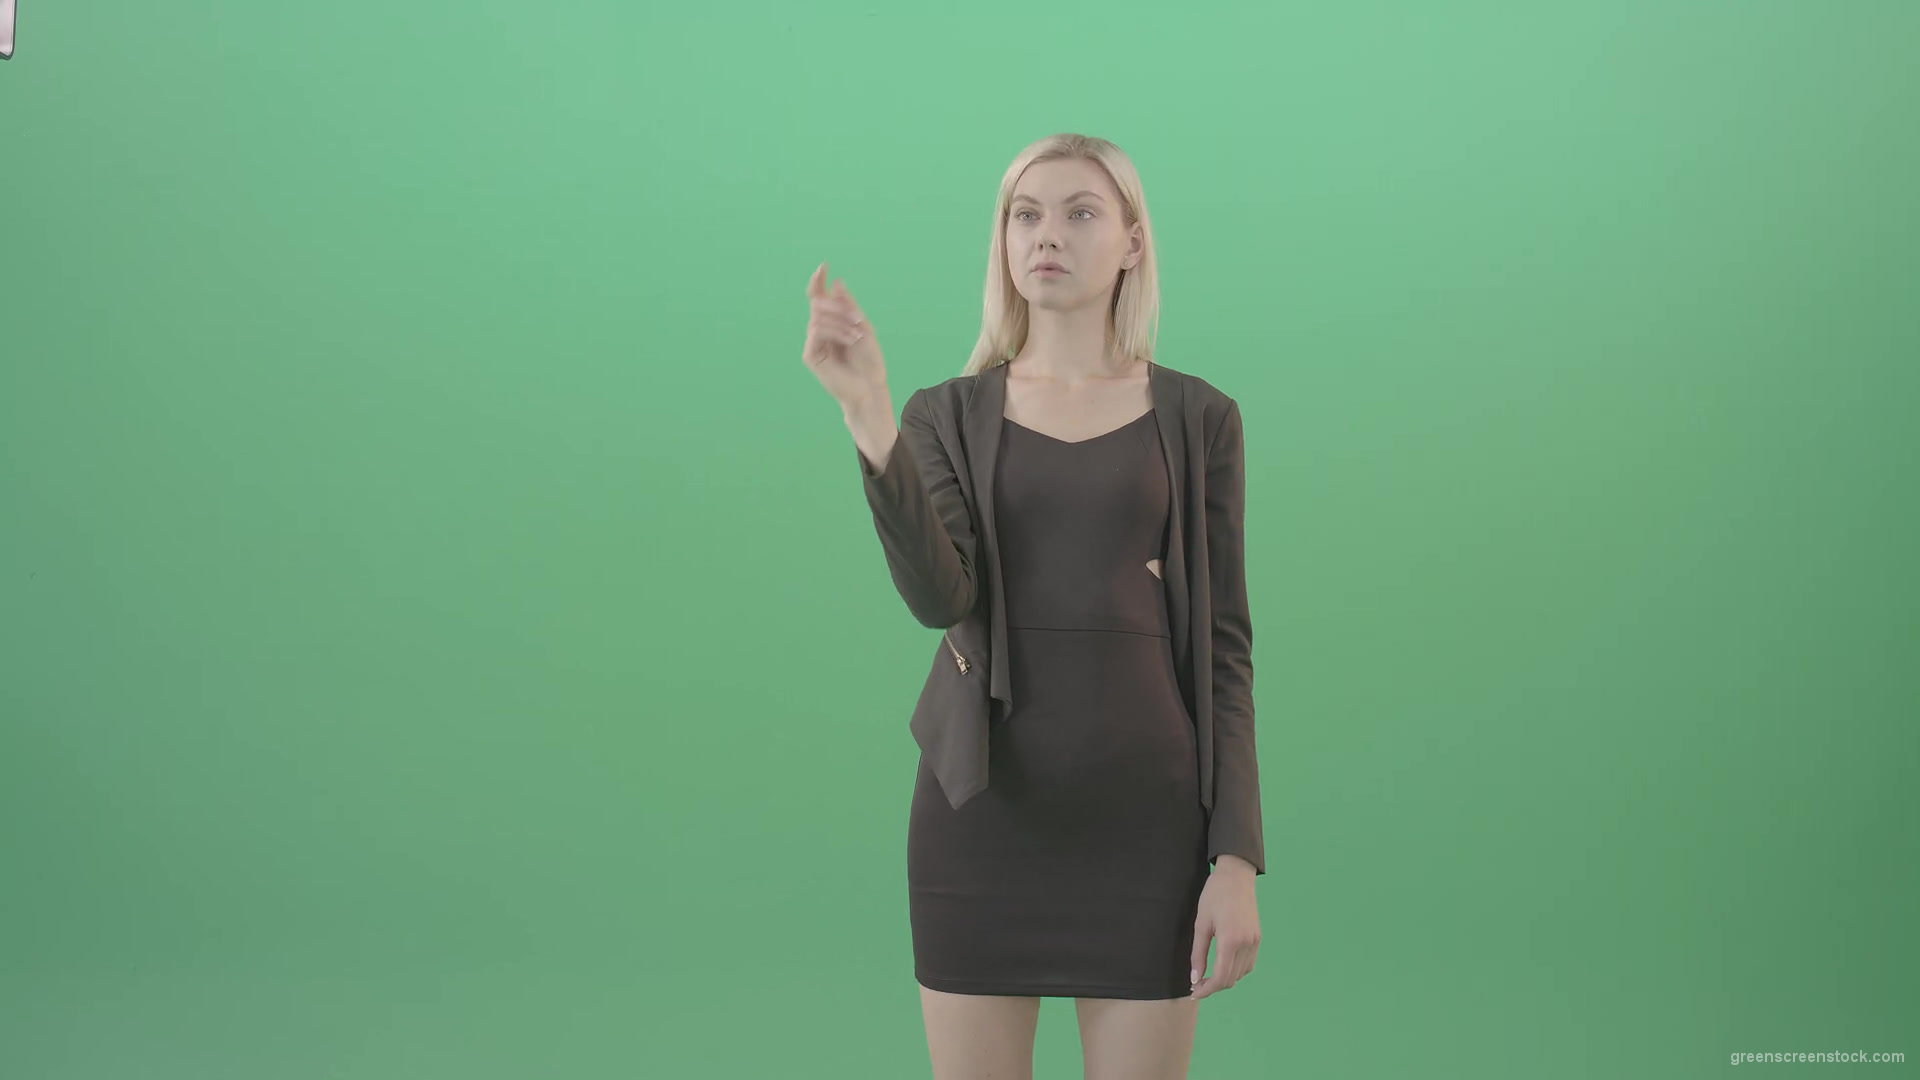 Blondie-shopping-in-virtual-store-on-touch-screen-in-green-screen-studio-4K-Video-Footage-1920_002 Green Screen Stock